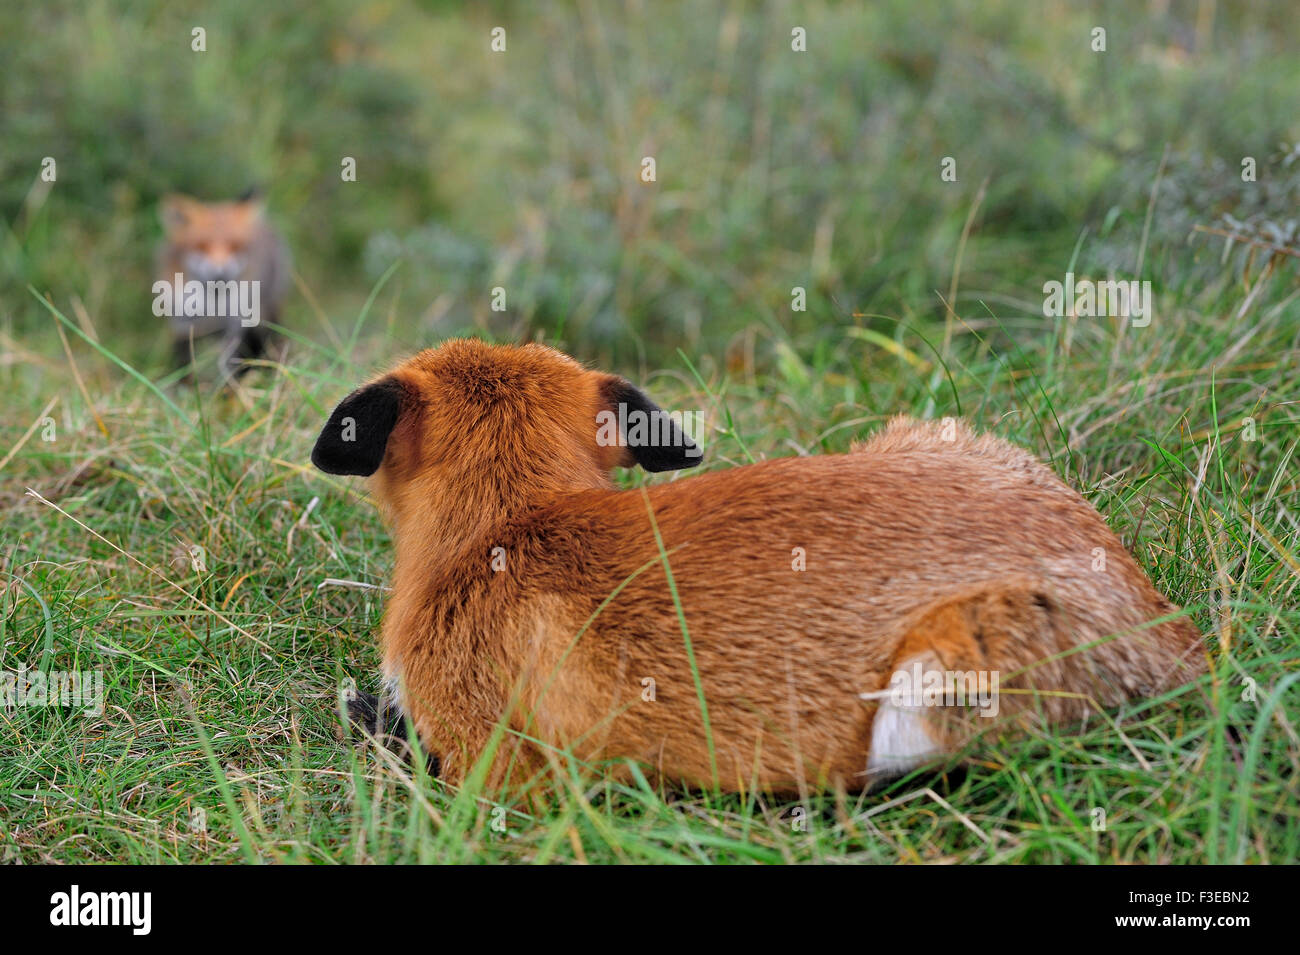 Territorial red fox (Vulpes vulpes) in defensive posture with ears flat is watching rival invading territory in grassland Stock Photo